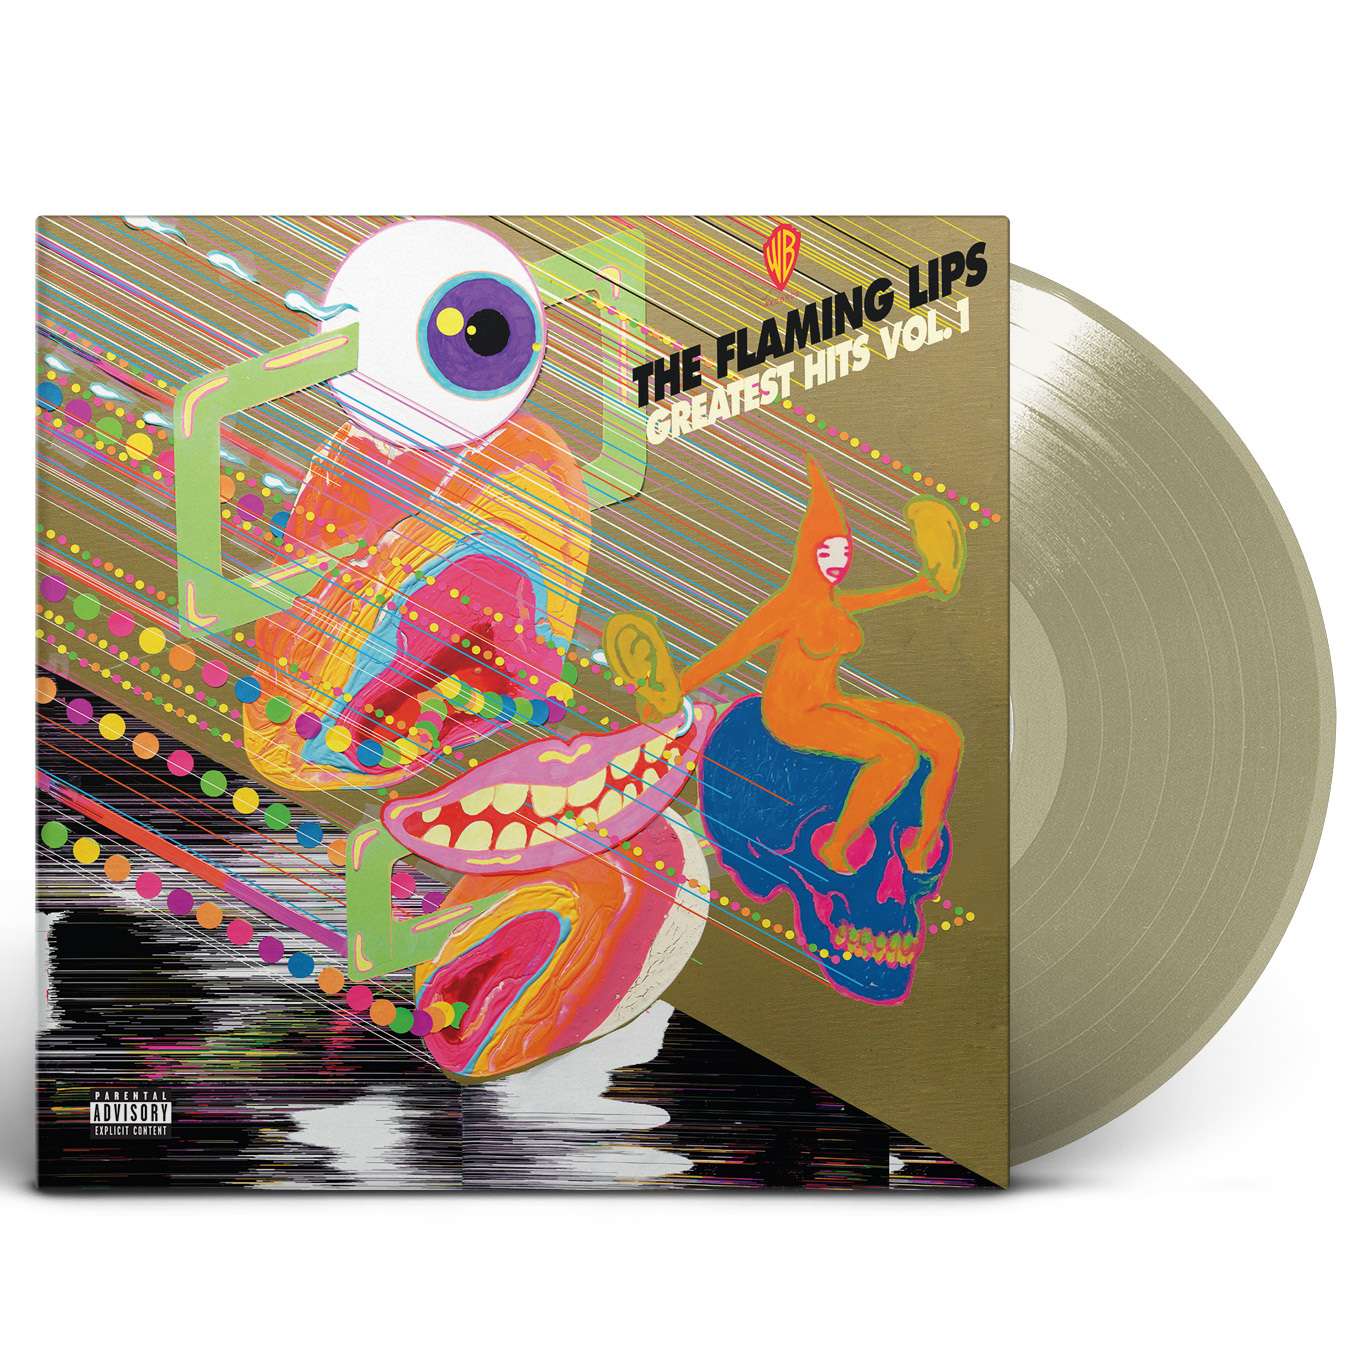 The Flaming Lips - Greatest Hits Vol. 1 - 33RPM